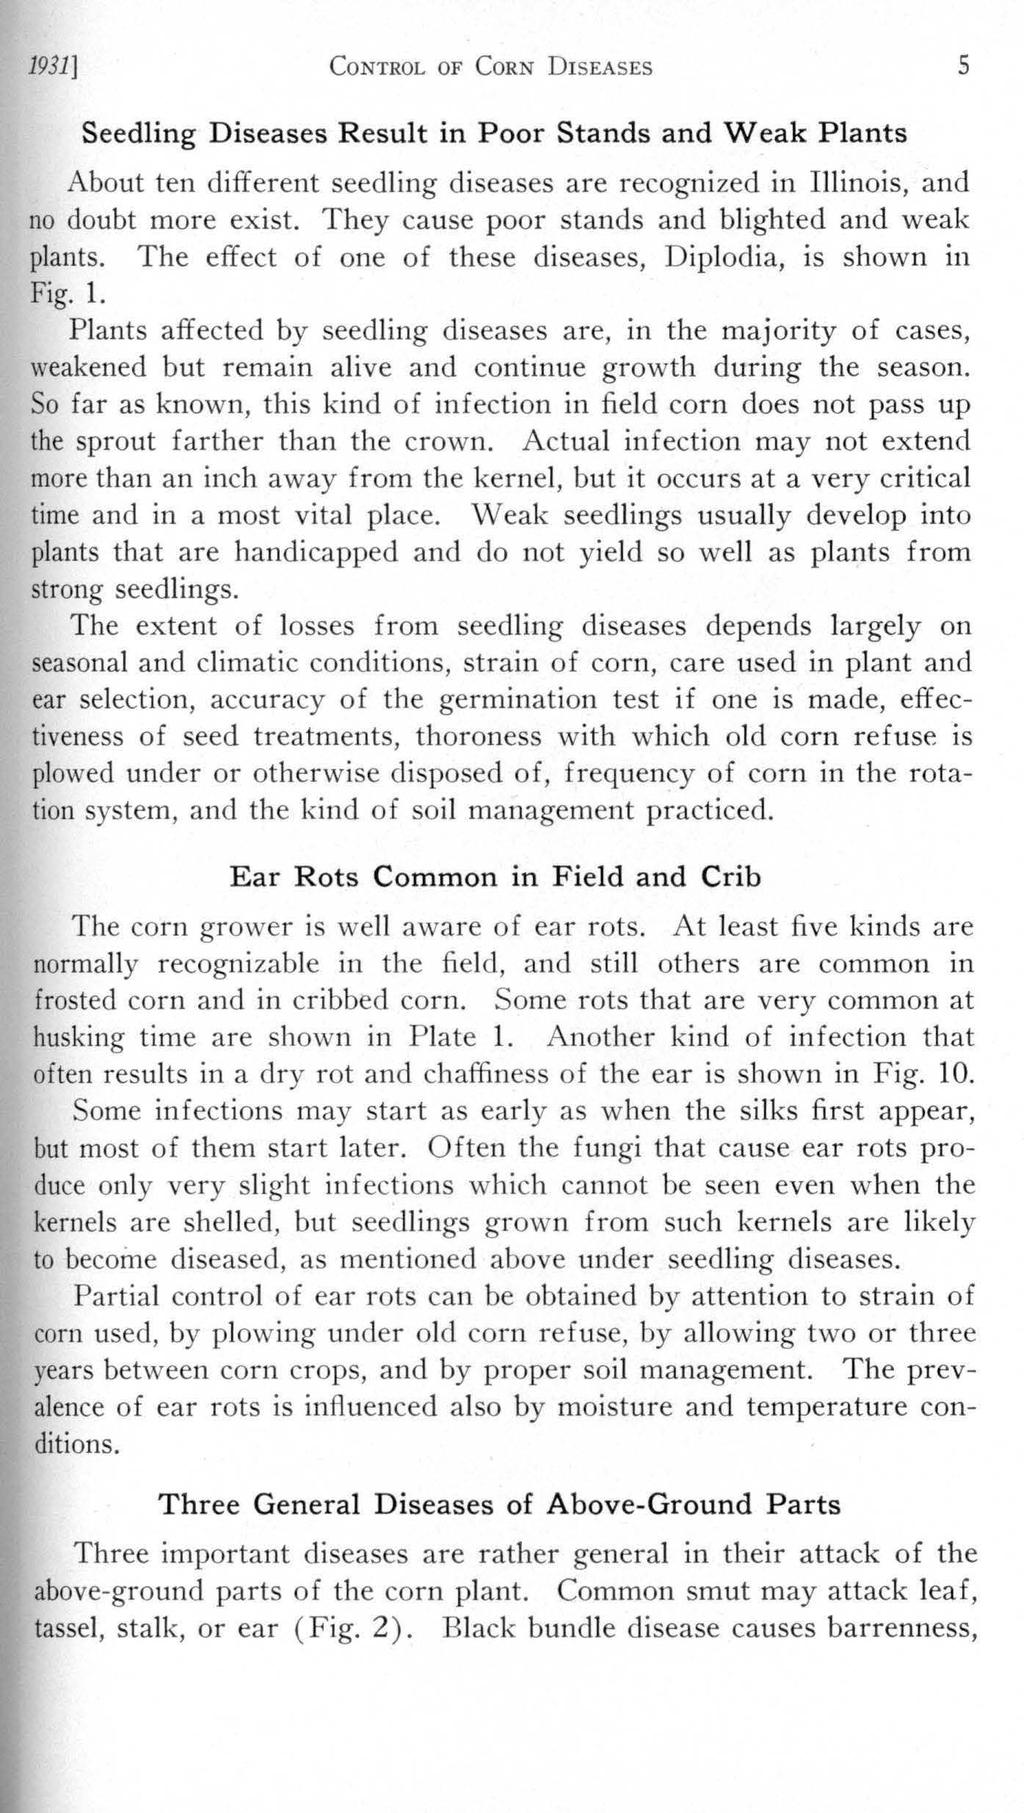 1931] CoNTROL OF CoRN DrsEASEs 5 Seedling Diseases Result in Poor Stands and Weak Plants About ten different seedling diseases are recognized in Illinois, and no doubt more exist.